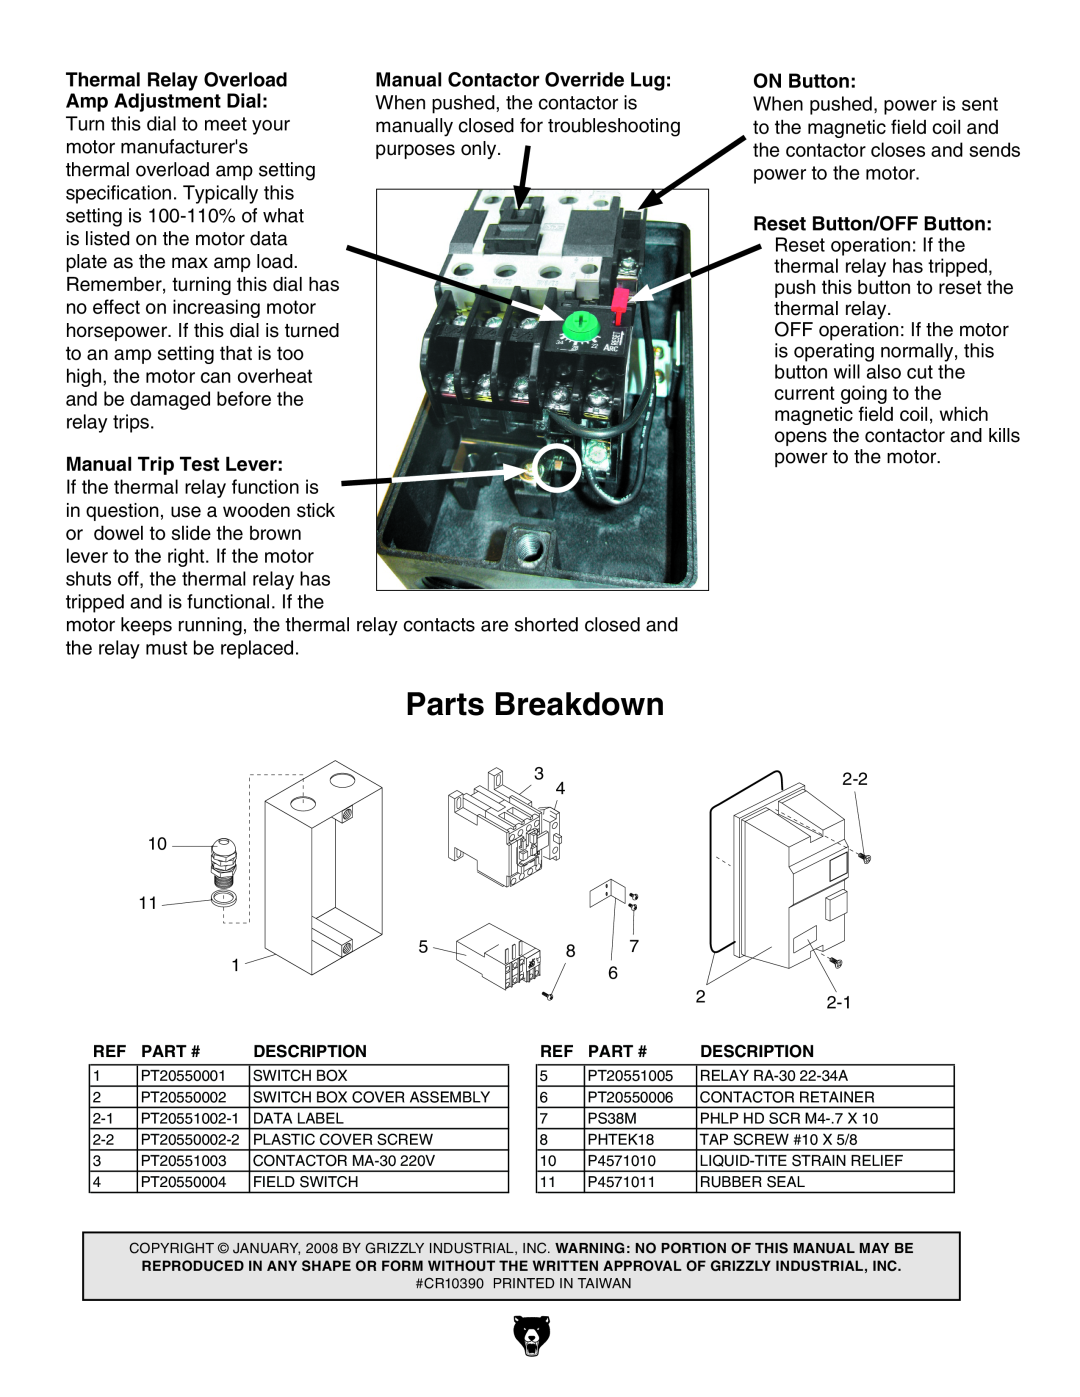 Grizzly T20551 instruction sheet Parts Breakdown, Thermal Relay Overload, ON Button, Manual Trip Test Lever 